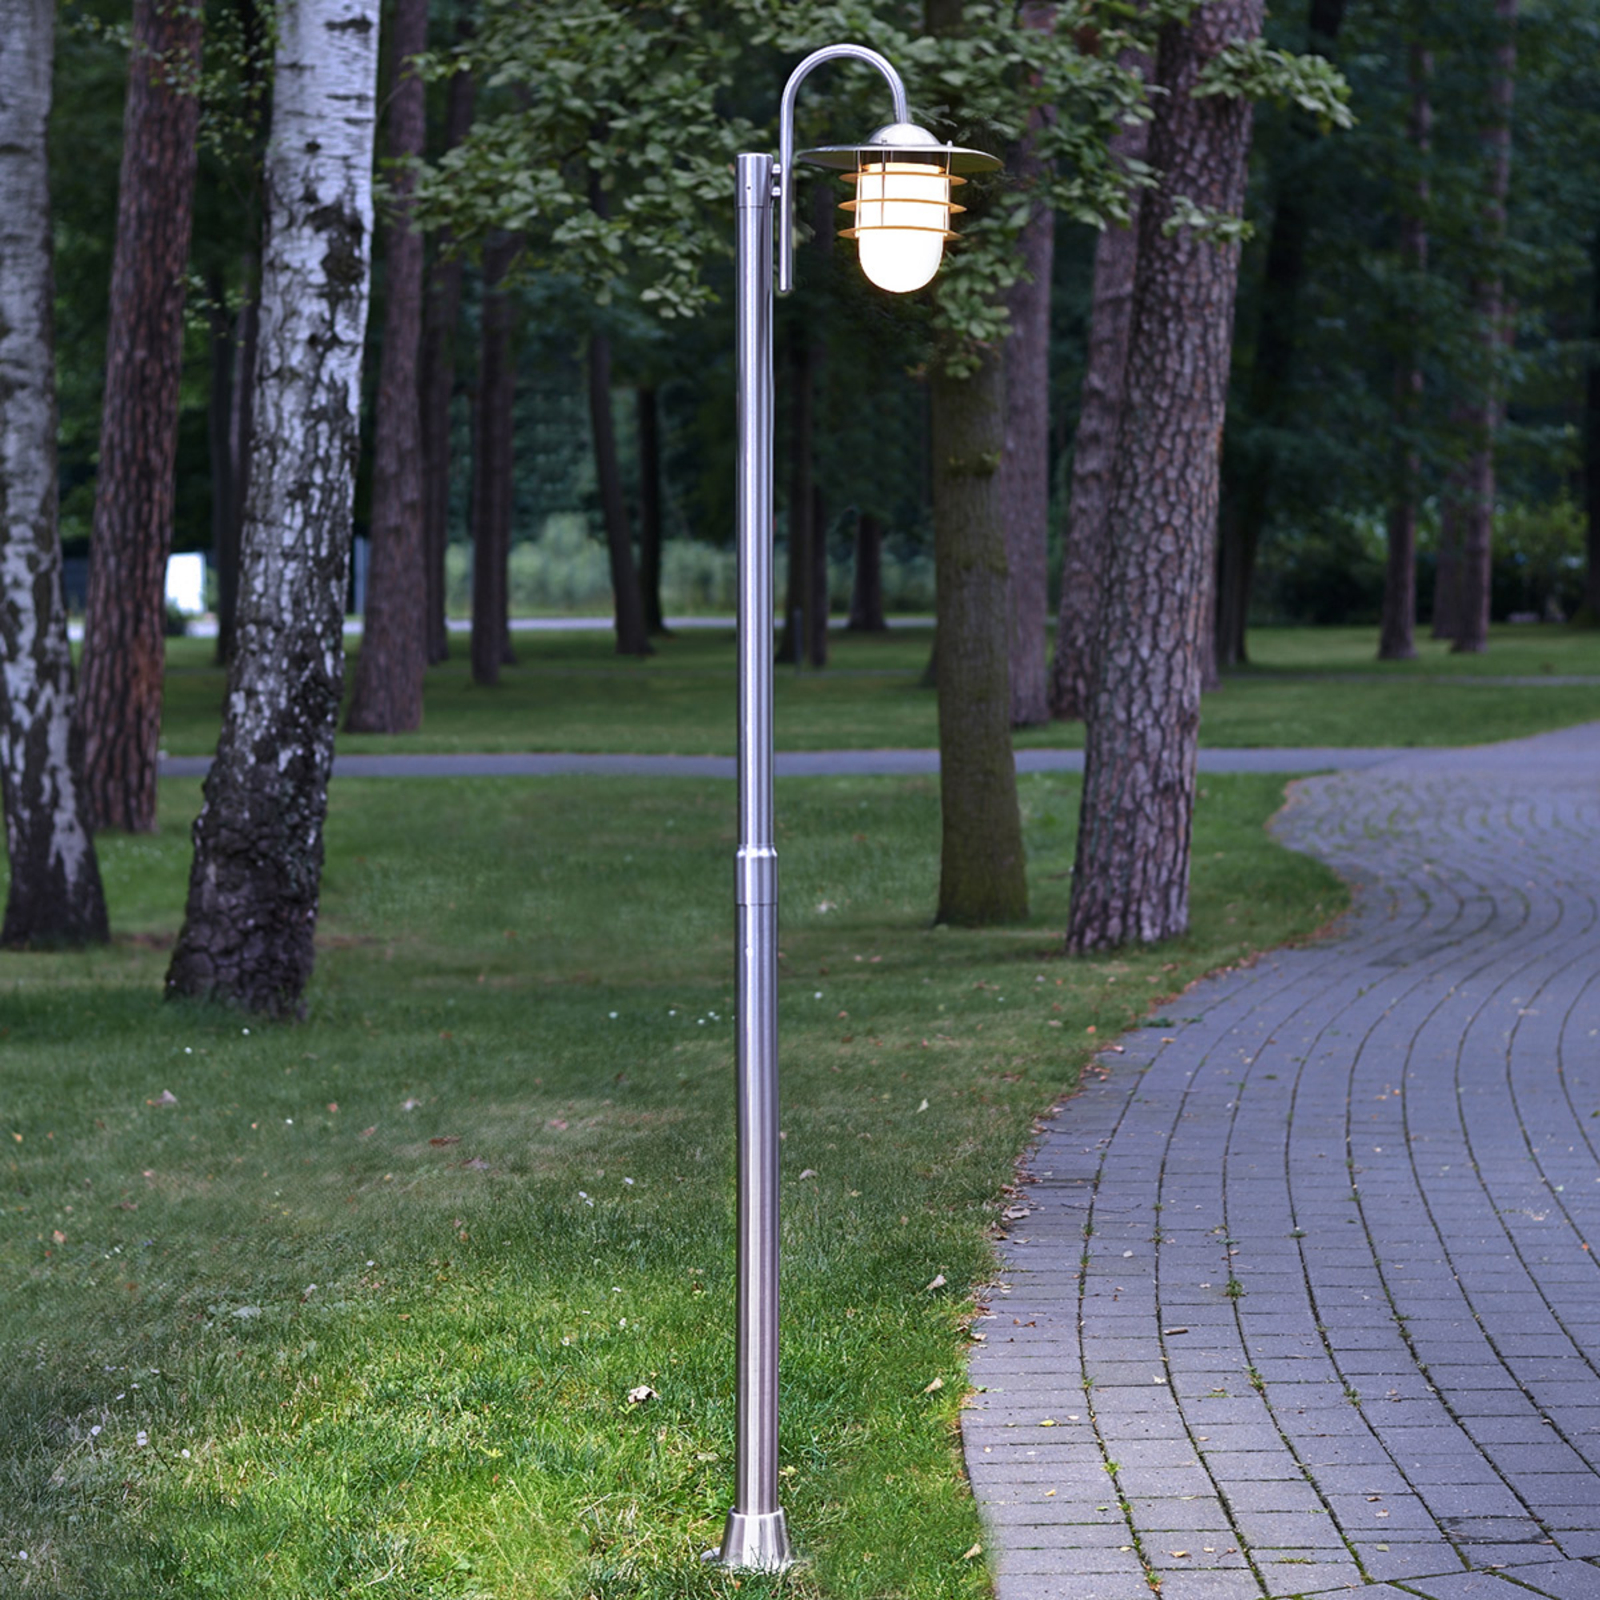 Mian curved lamp post made of stainless steel